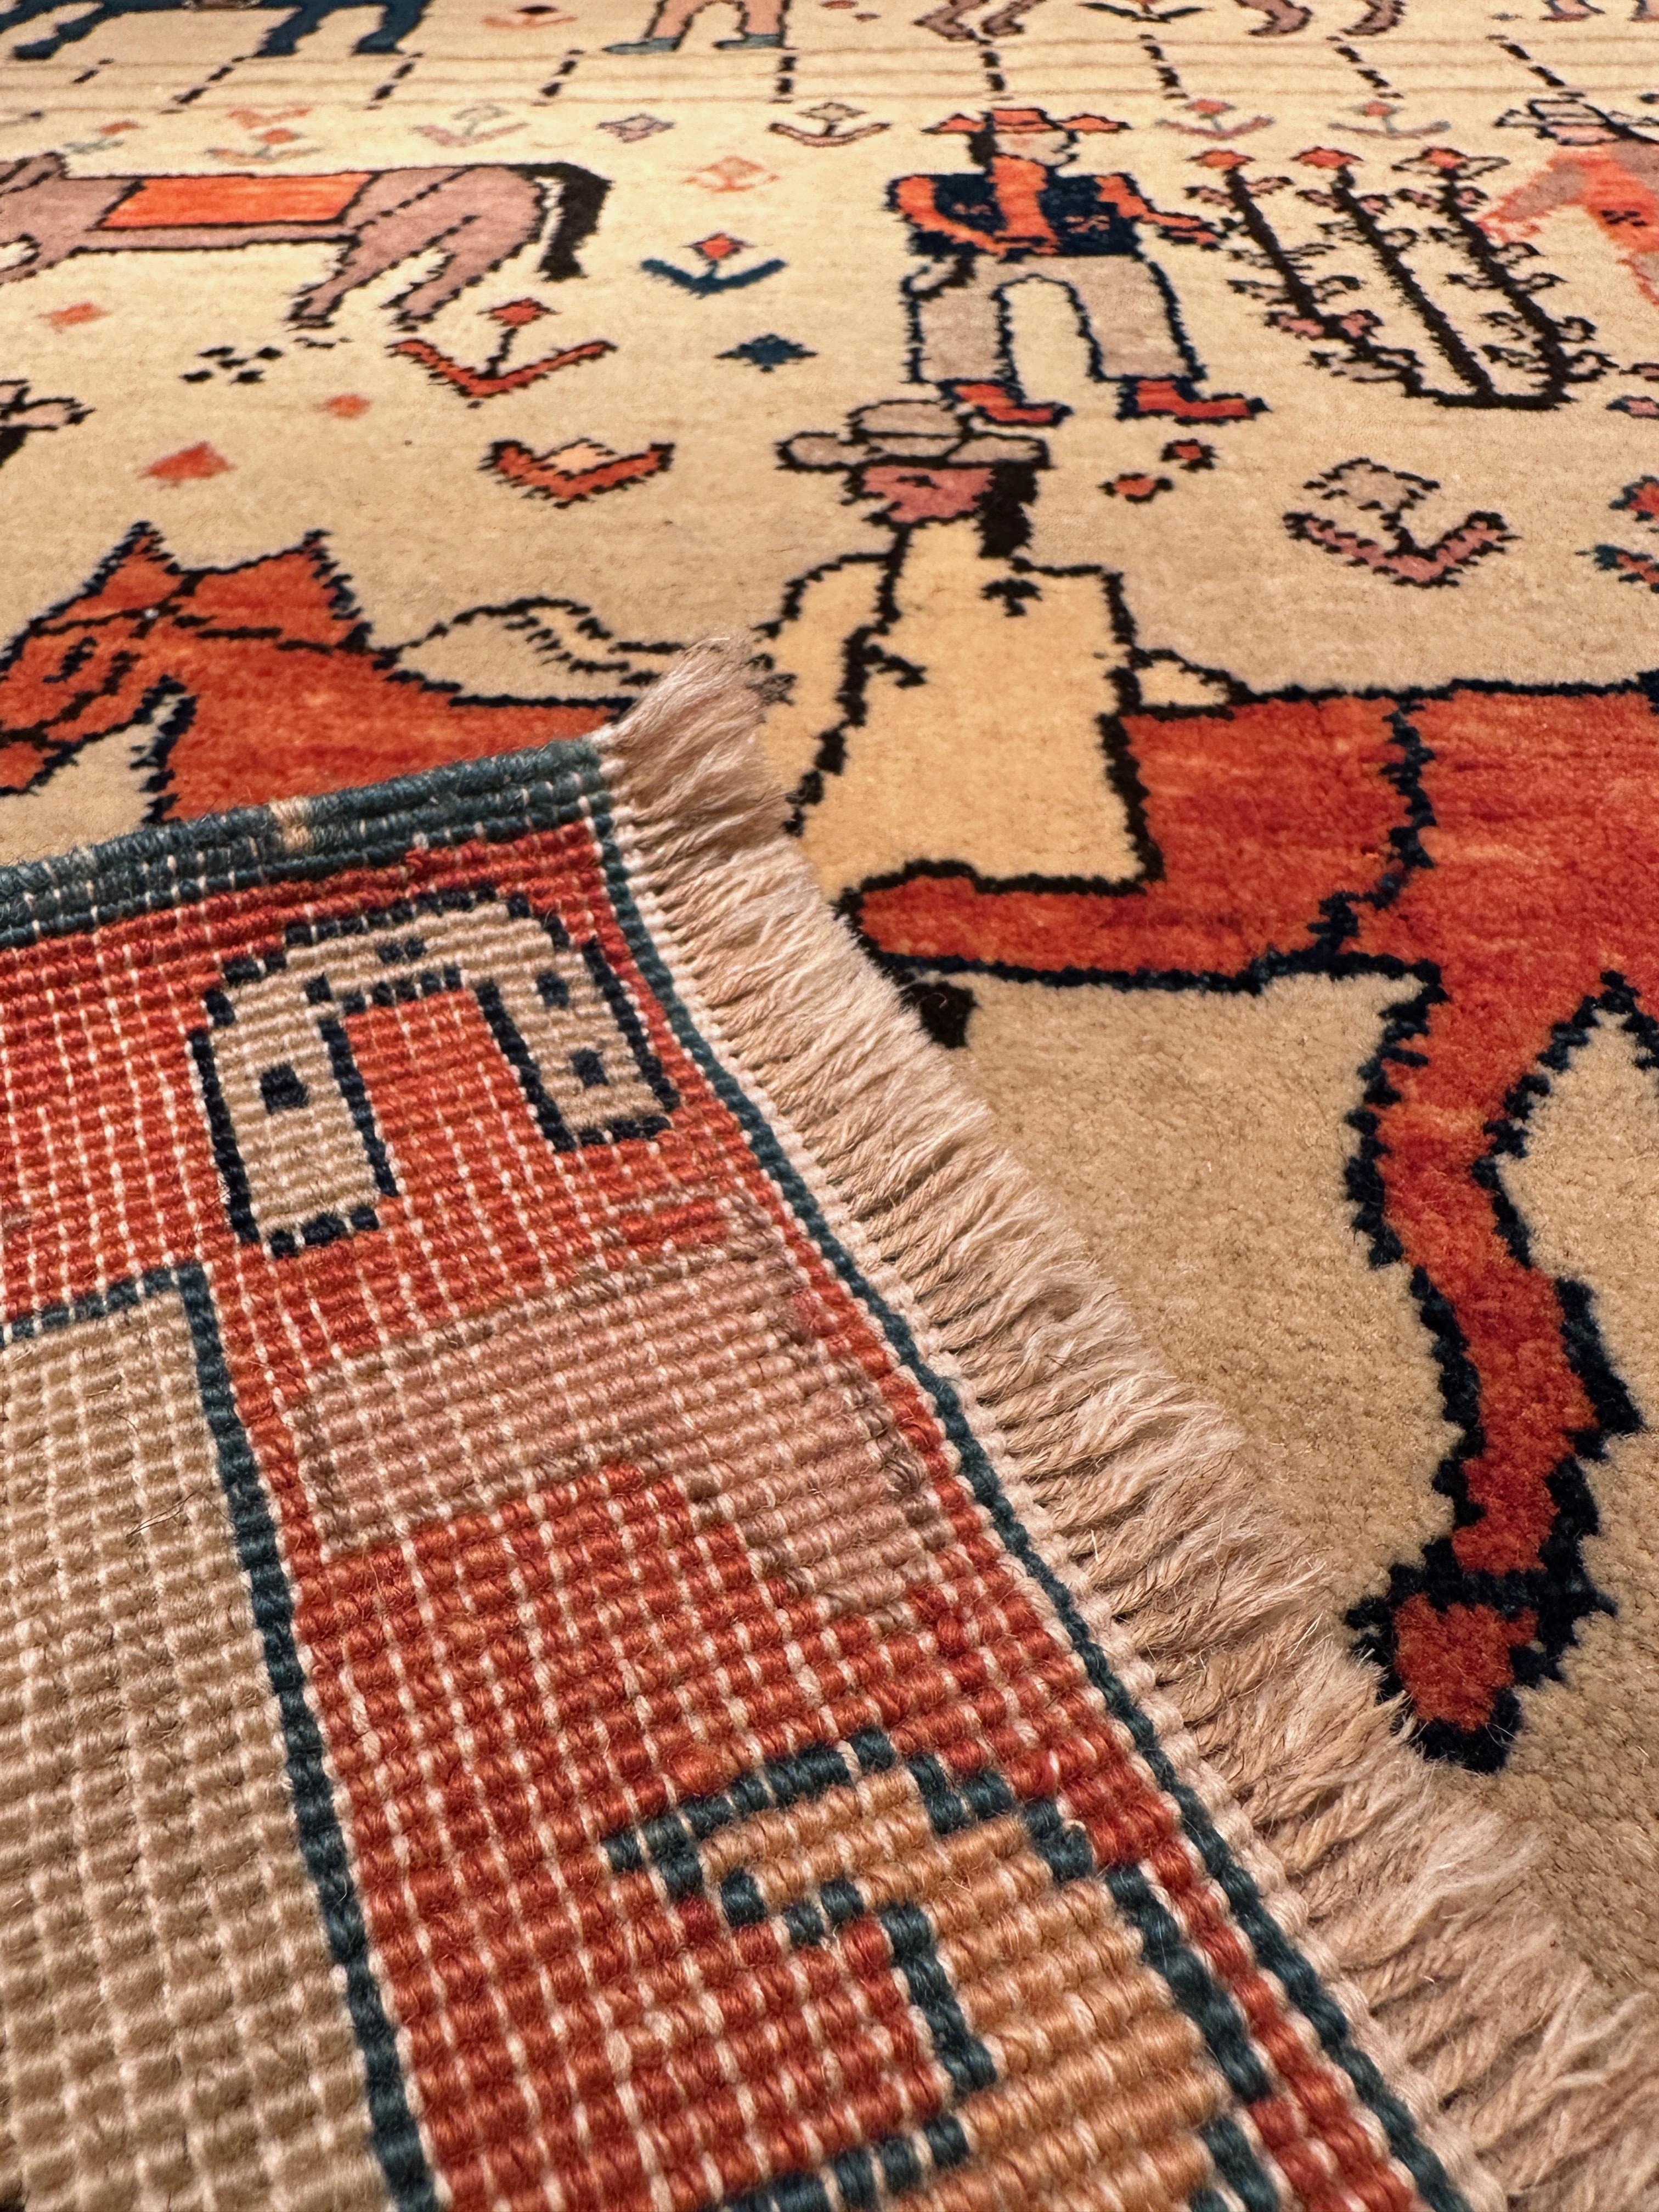 This unique design rug is interpreted by our designers with a composition of pictorial western-style life.

Color summary: 17 colors in total, most used 4 colors are;
Misty Moss 14 (Spurge – Madder Root)
Scarlet 5 (Madder Root)
Dark Brown 316